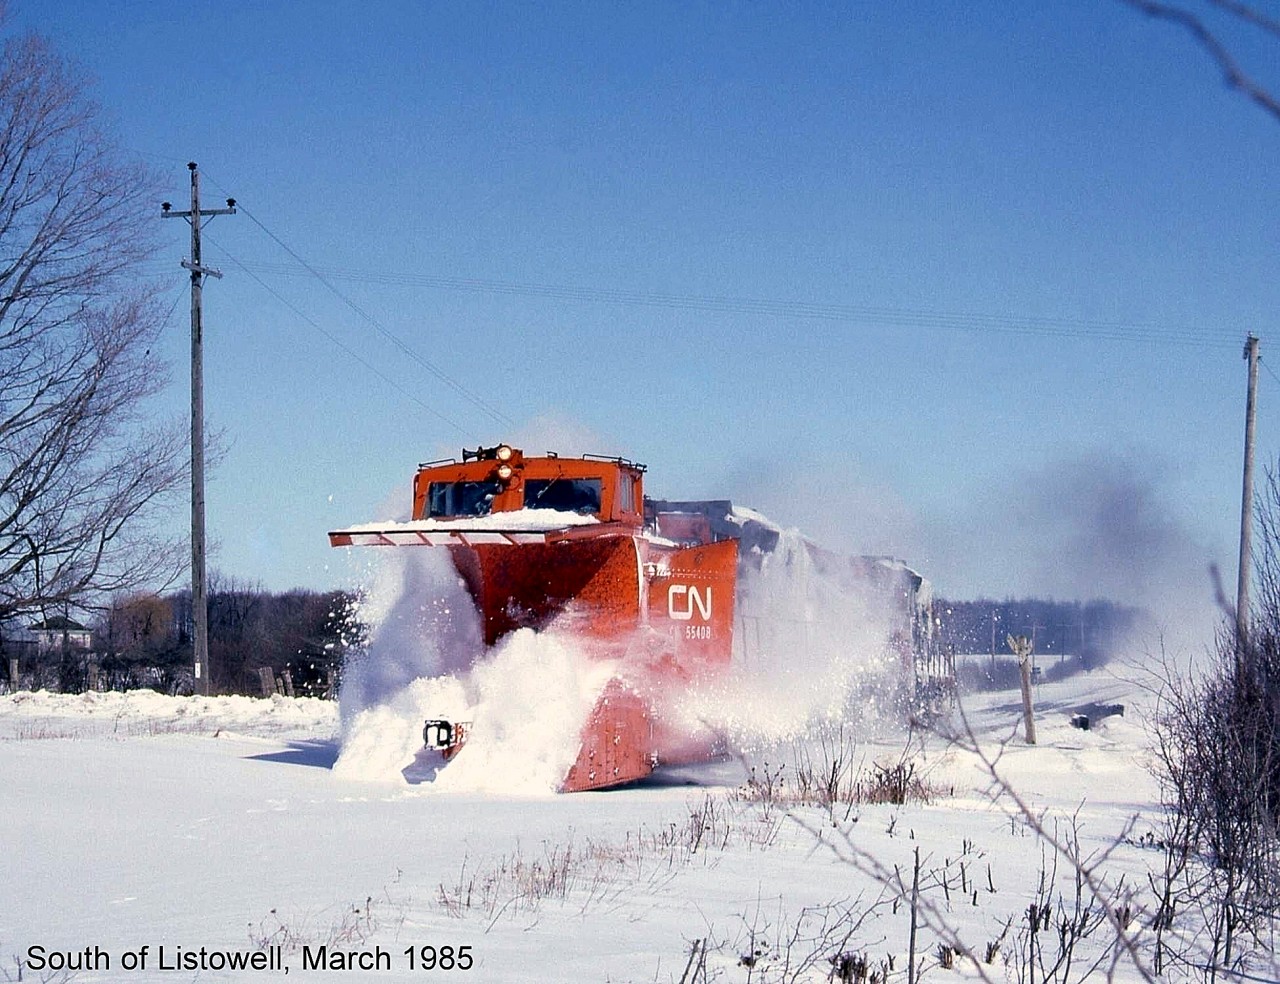 I was working in the Listowell area in March of 1985 and heard on my scanner that there was a plow extra heading south on the CN Newton Sub (later west) to Kincardine. I had time to go to a side road south of town and set up near a crossing and the plow soon appeared. I took my photo just before it passed then WAM, I was bowled over by a sheet of heavy snow and knocked over a fence (I was not injured but it was a shock). I then went to a local restaurant and tidied up my clothing. The resulting photo was average but it brings back memories: CN snowplow 55408 charging across a grade crossing south of Listowel, propelled by a pair of GP9 units.

[Editor's note: CN plow 55408, a wedge plow built by Eastern Car Co (Trenton NS) in 1937, mets its end not too long ago after avoiding the scrapper once. Once it was retired from CN in the 90's (many lines being abandoned or torn up in the southern Ontario area reduced the need for plows) it was sold to Zubicks in London for scrap. In 1995 the Goderich Exeter Railway traded their plow, 55437, to Zubicks for 55408, as it was in better shape. Known by some as their "orange plow" (they also owned sister 55413 painted black), it continued the fight on mother nature for its new owner until recently, when it was cut up for scrap in Goderich during May 2013.]

(Note, geotagged location may not be exact)